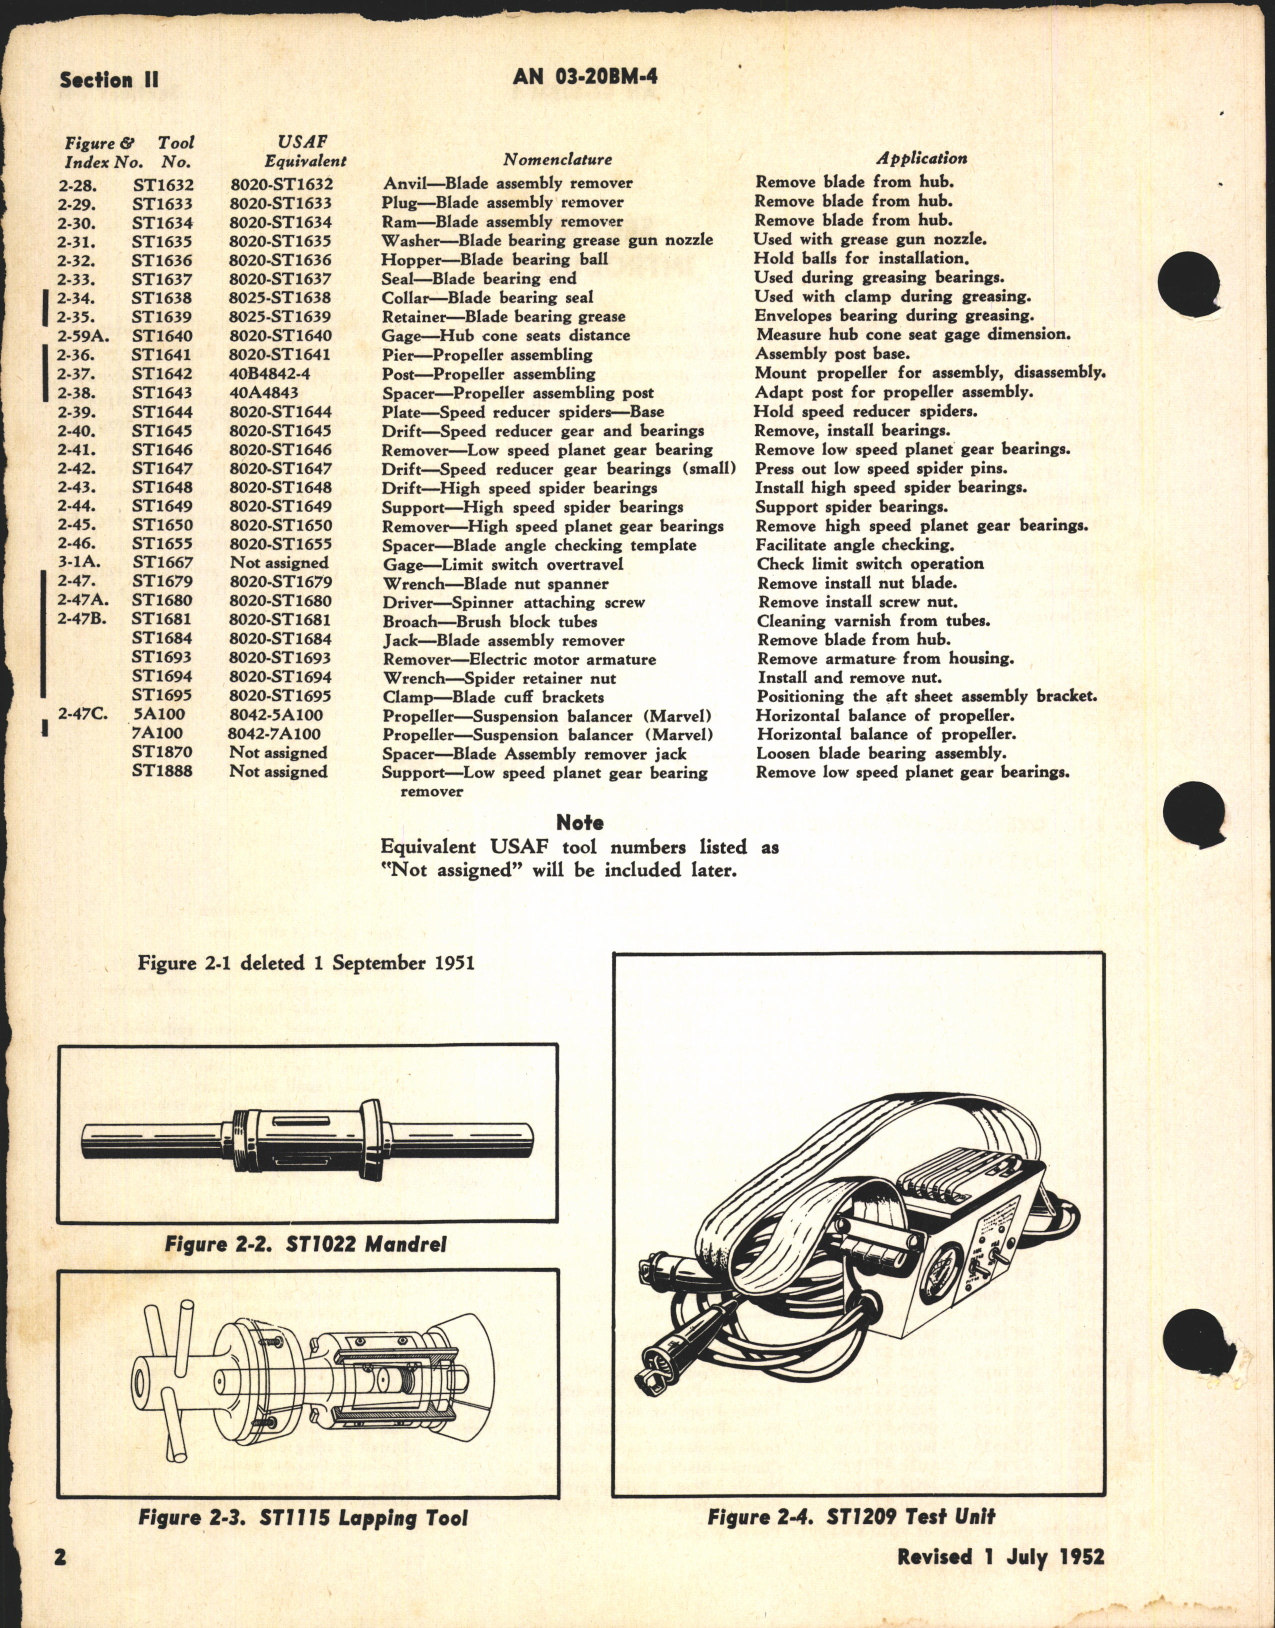 Sample page 6 from AirCorps Library document: Overhaul Instructions for Electric Propeller Models C634S-C314 and C634S-C402